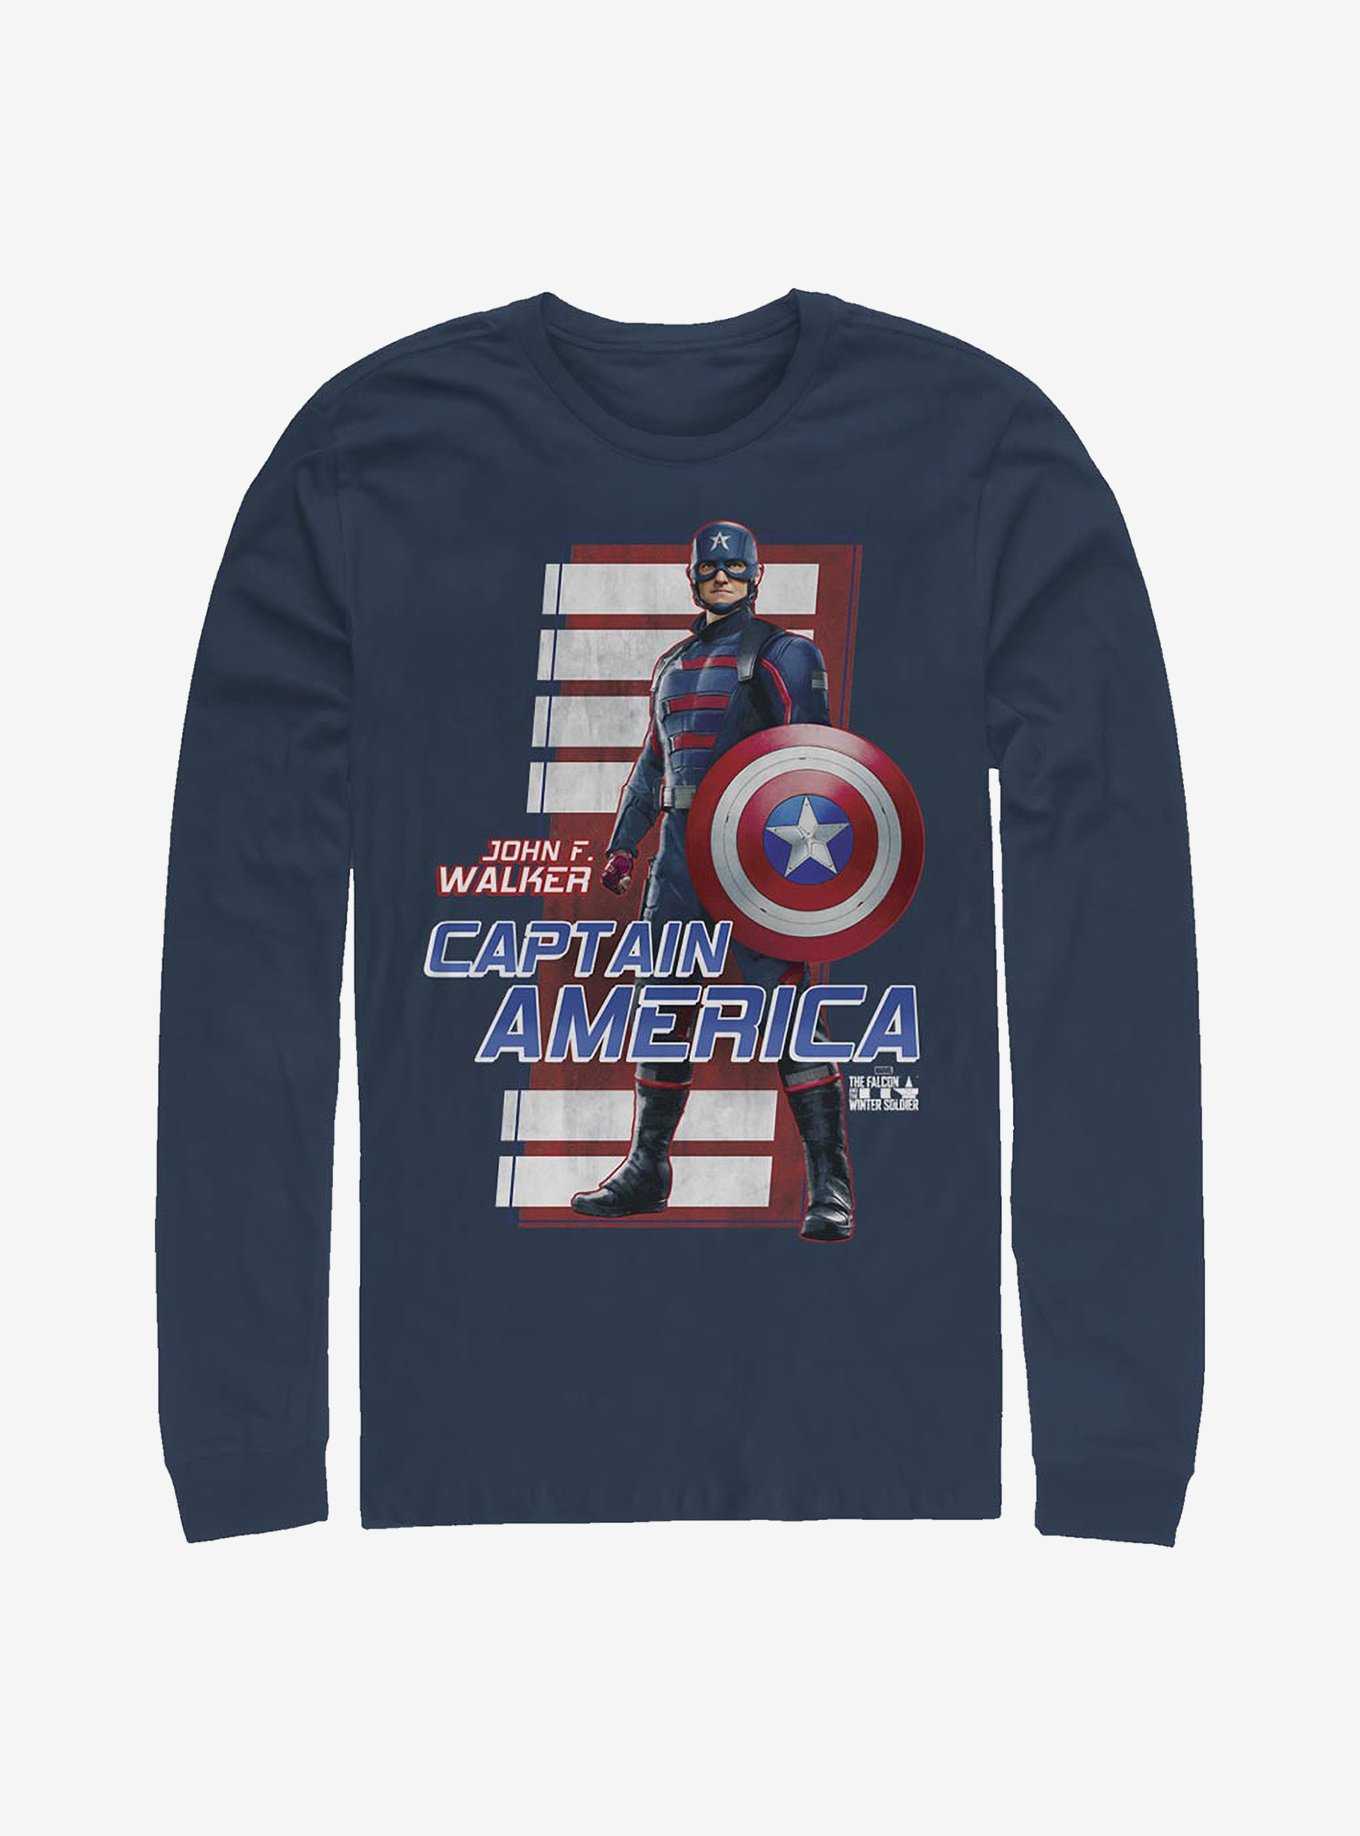 Marvel The Falcon And The Winter Soldier John F. Walker Captain America Long-Sleeve T-Shirt, , hi-res